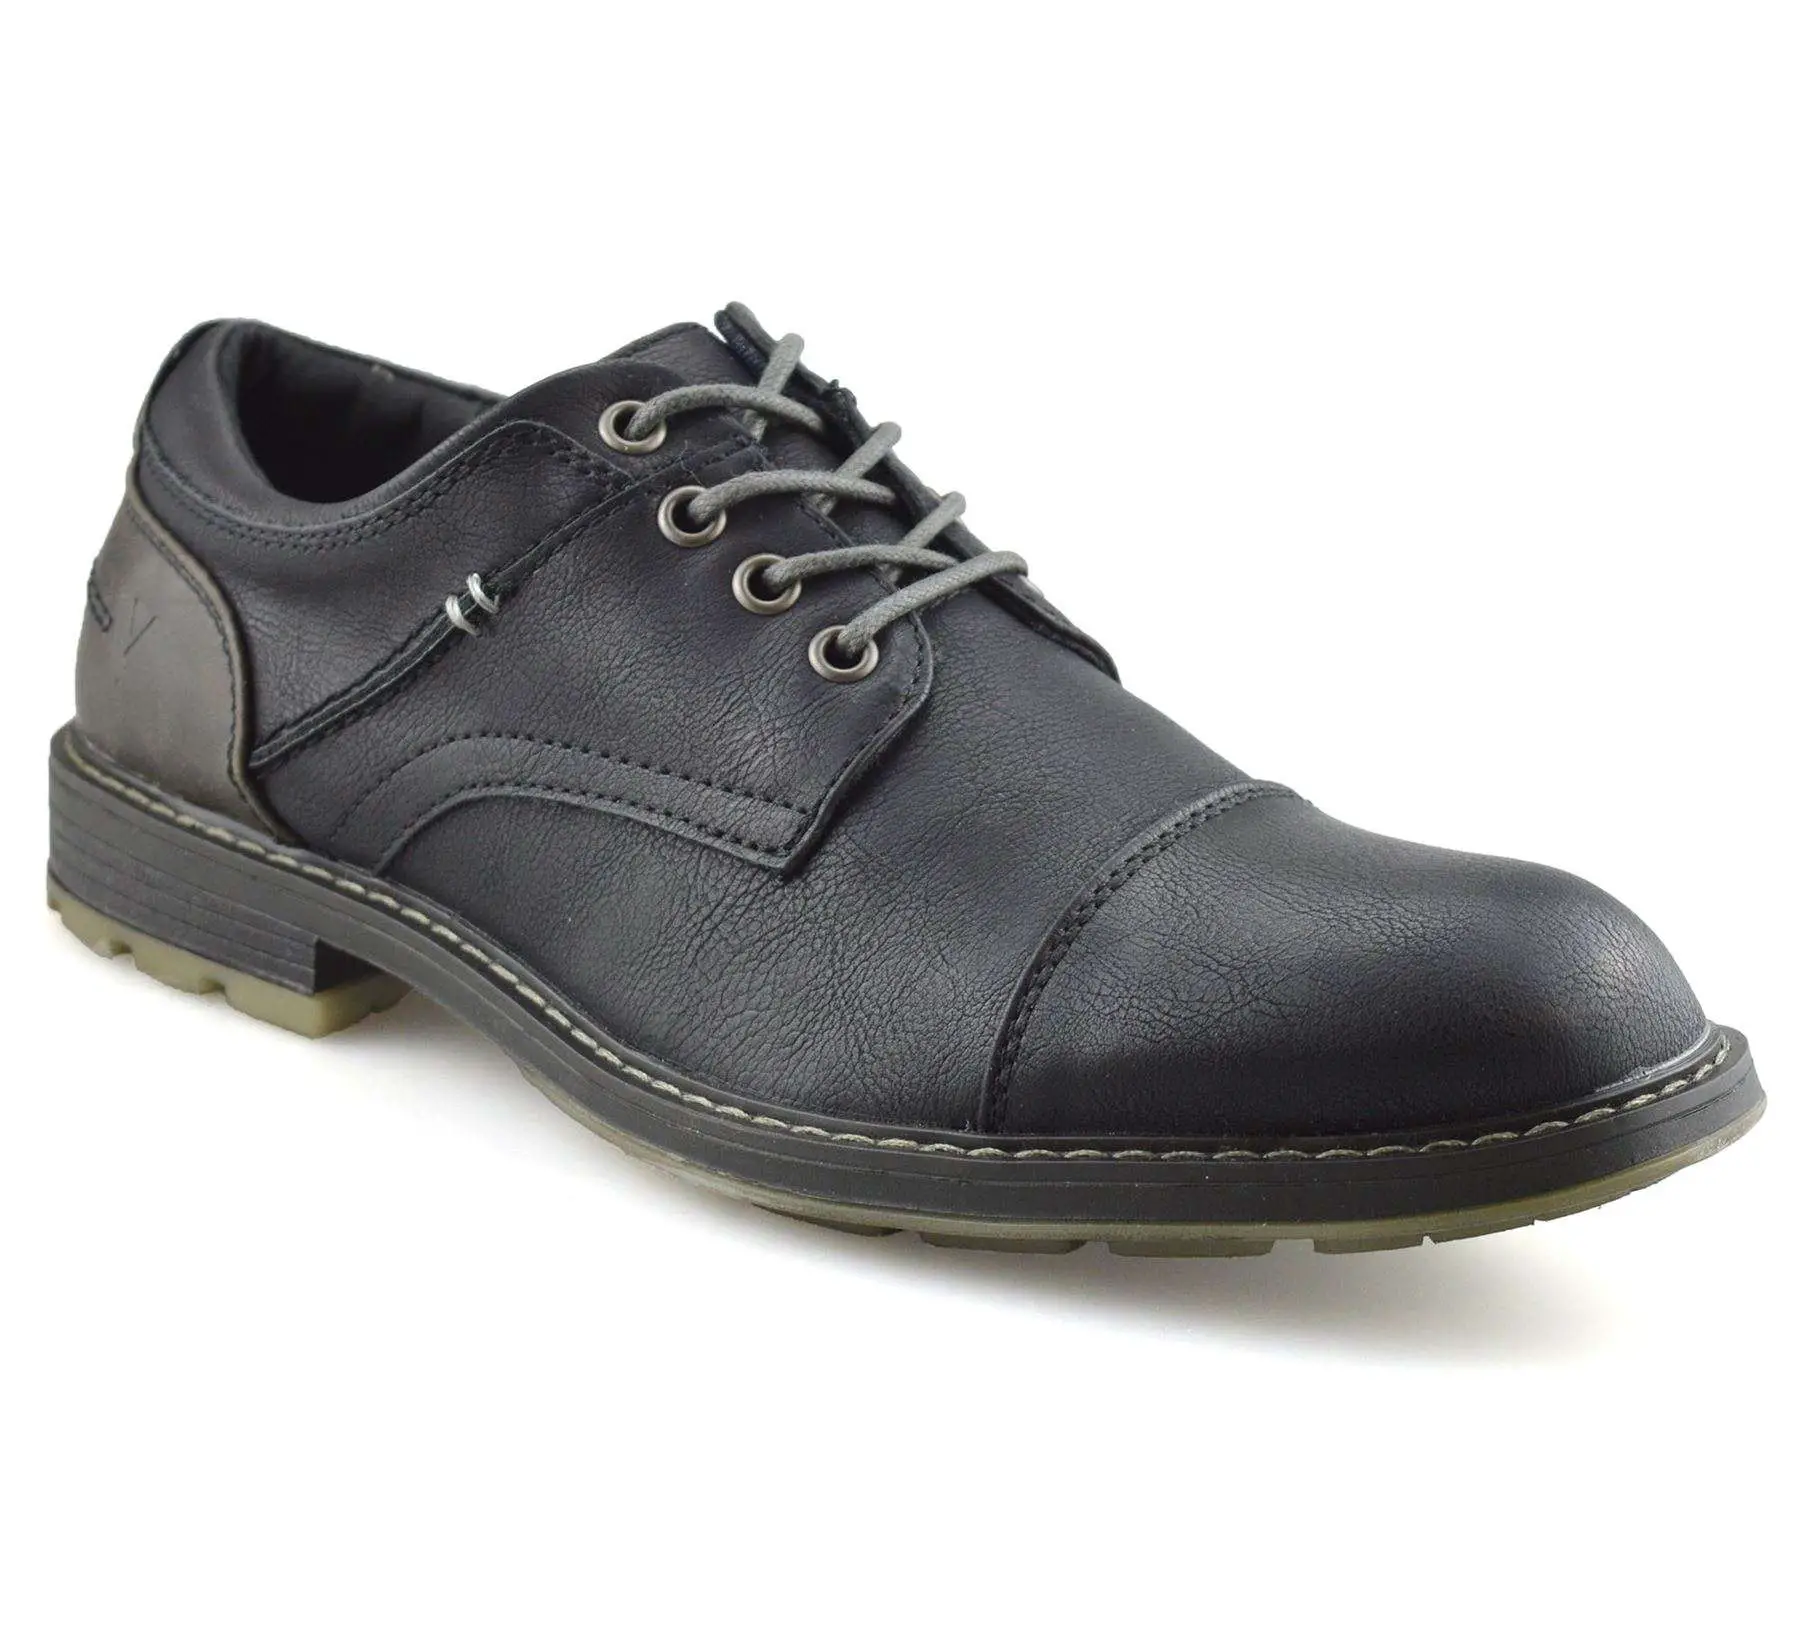 Mens Smart Casual Comfort Lace Up Work Office Formal Derby Toe Cap ...